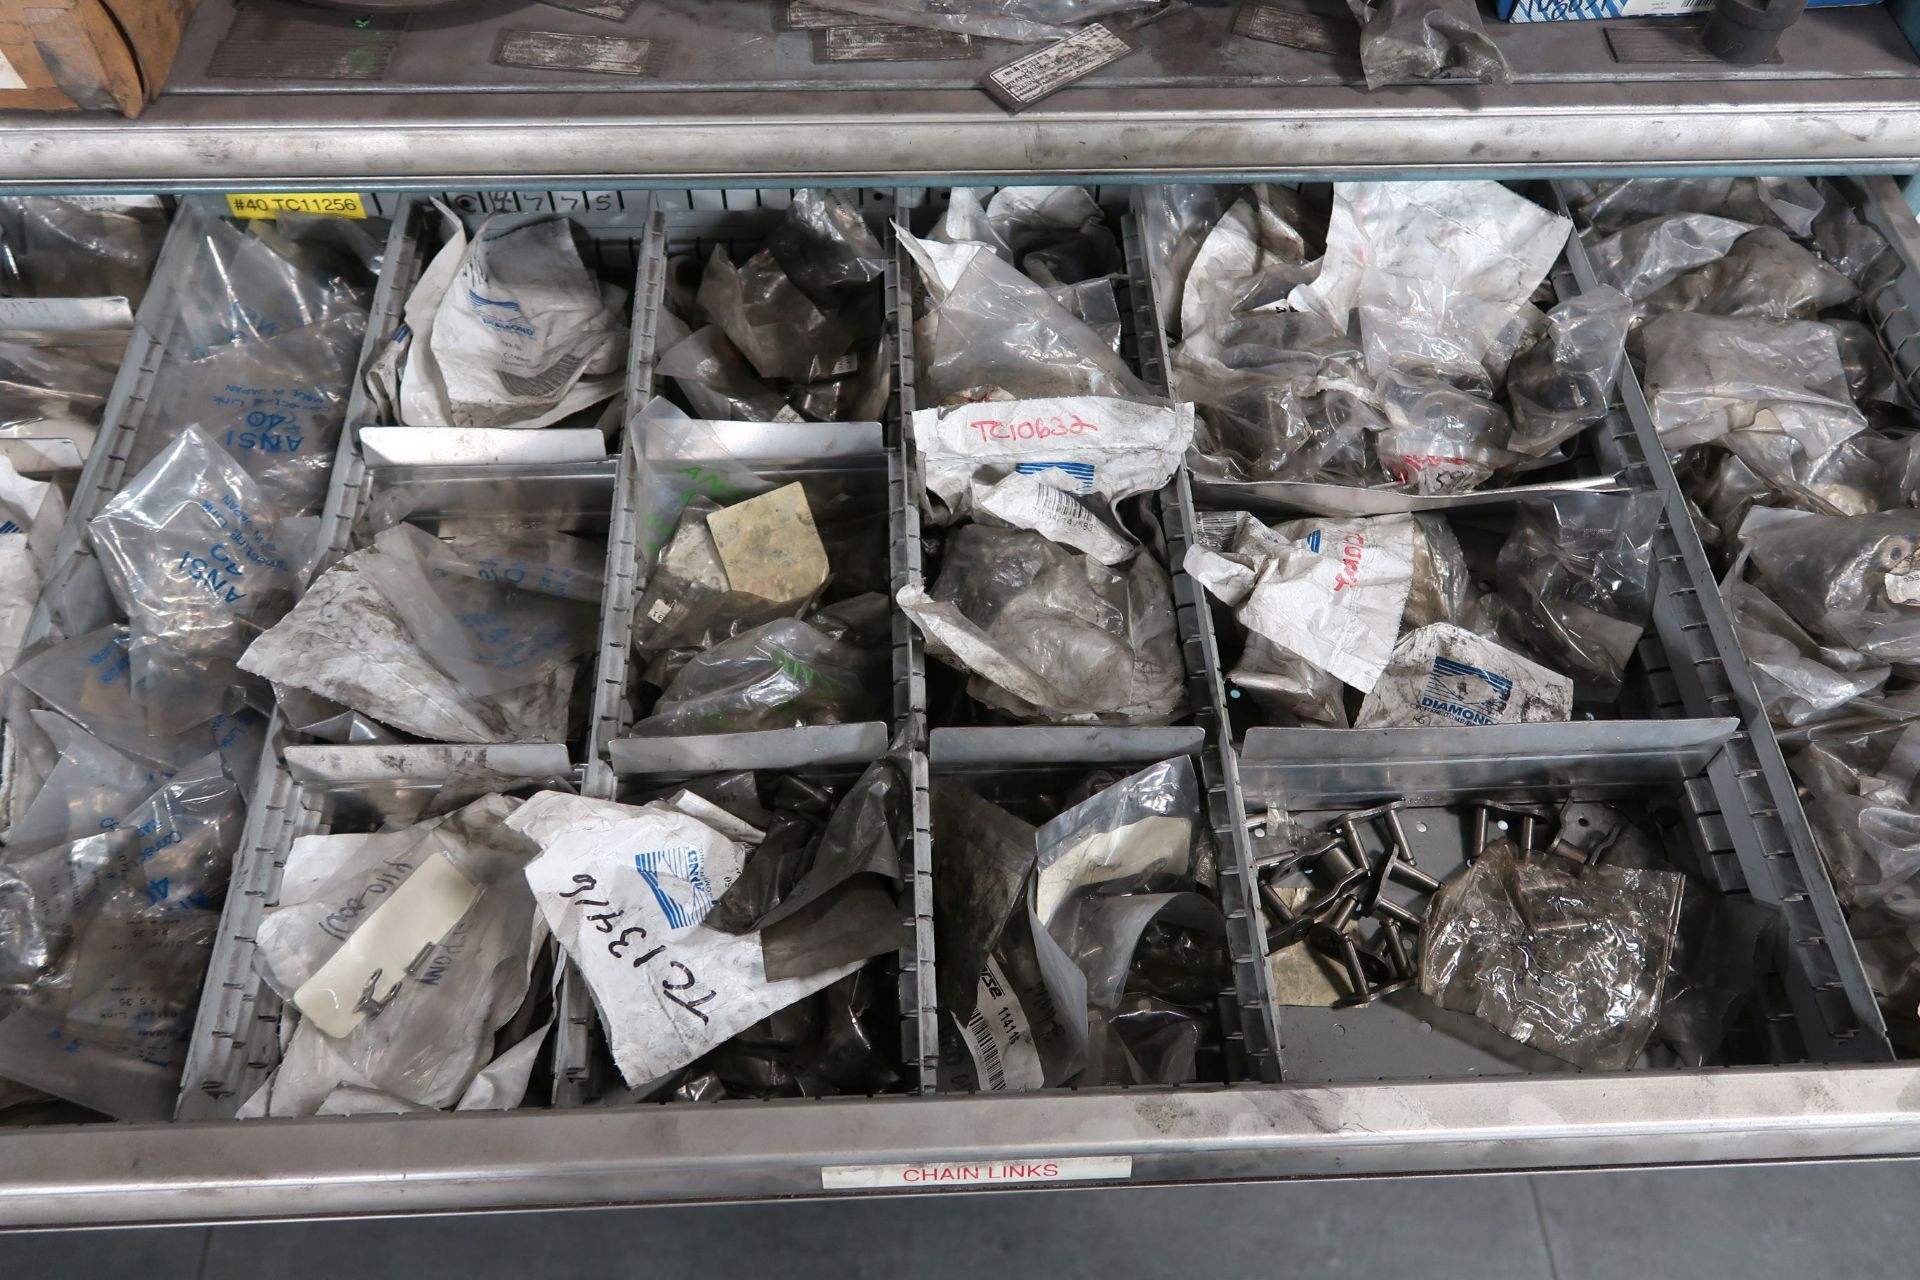 TOOLING CABINETS WITH CONTENTS - MOSTLY MACHINE PARTS **LOADING PRICE DUE TO ERRA - $2,000.00** - Image 22 of 59